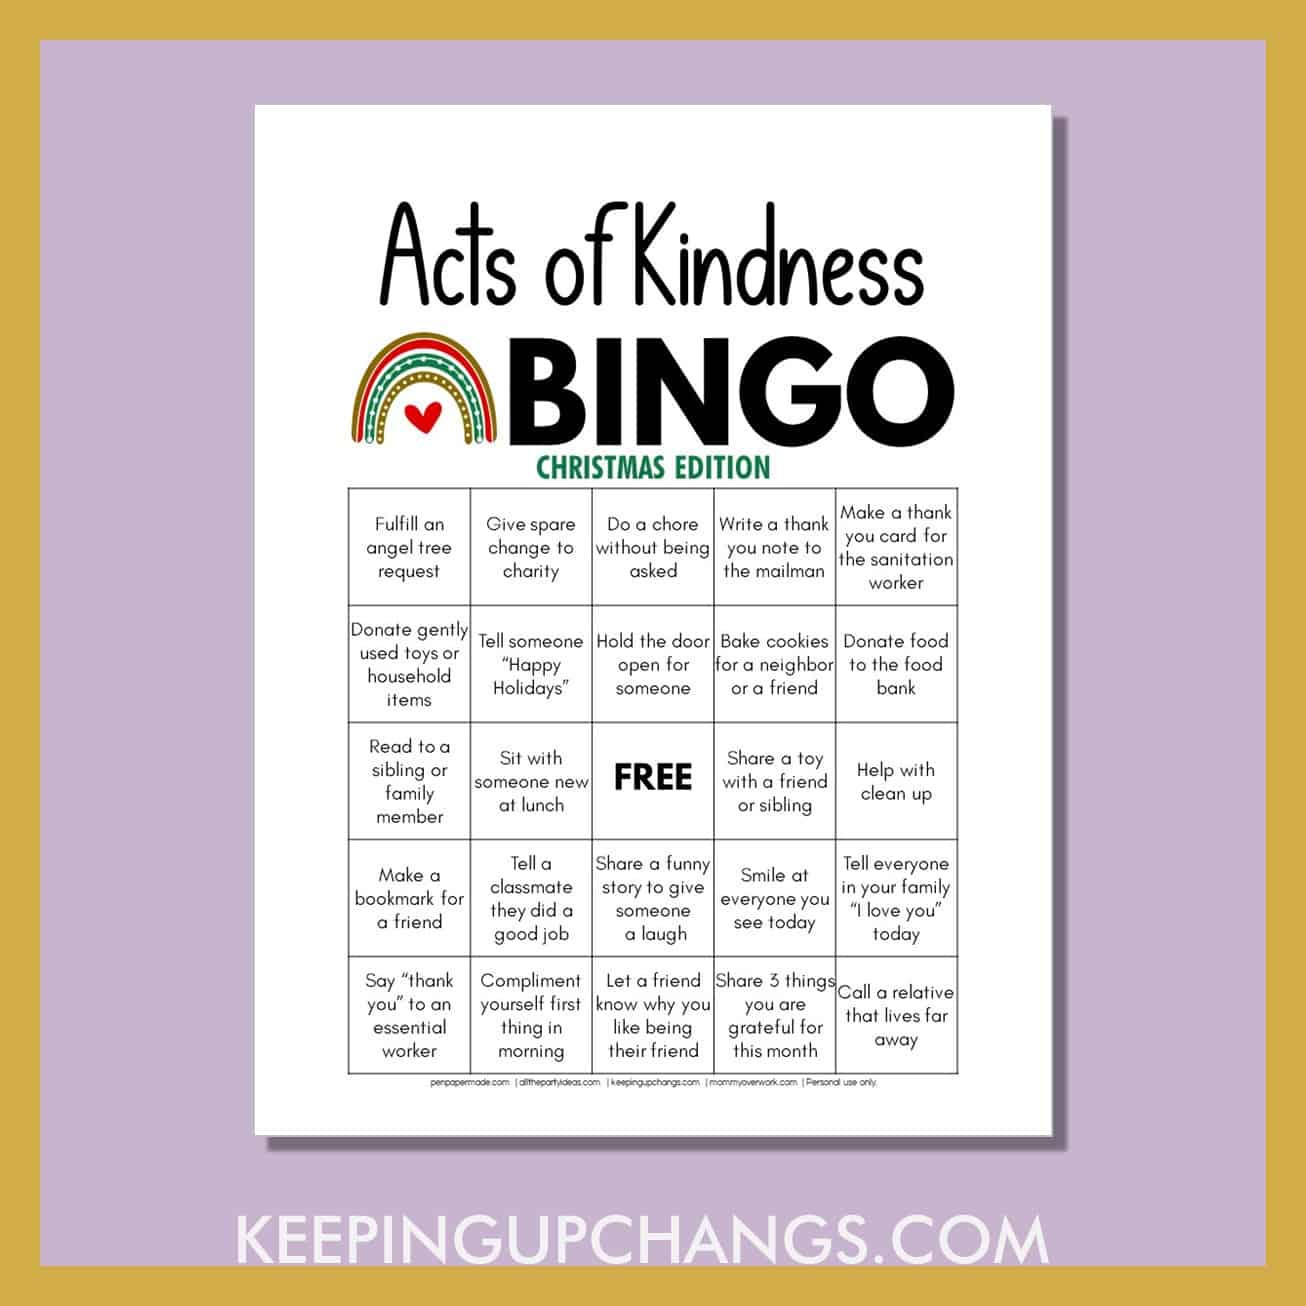 acts of kindness bingo for christmas with fun activities to pay it forward during the holidays.